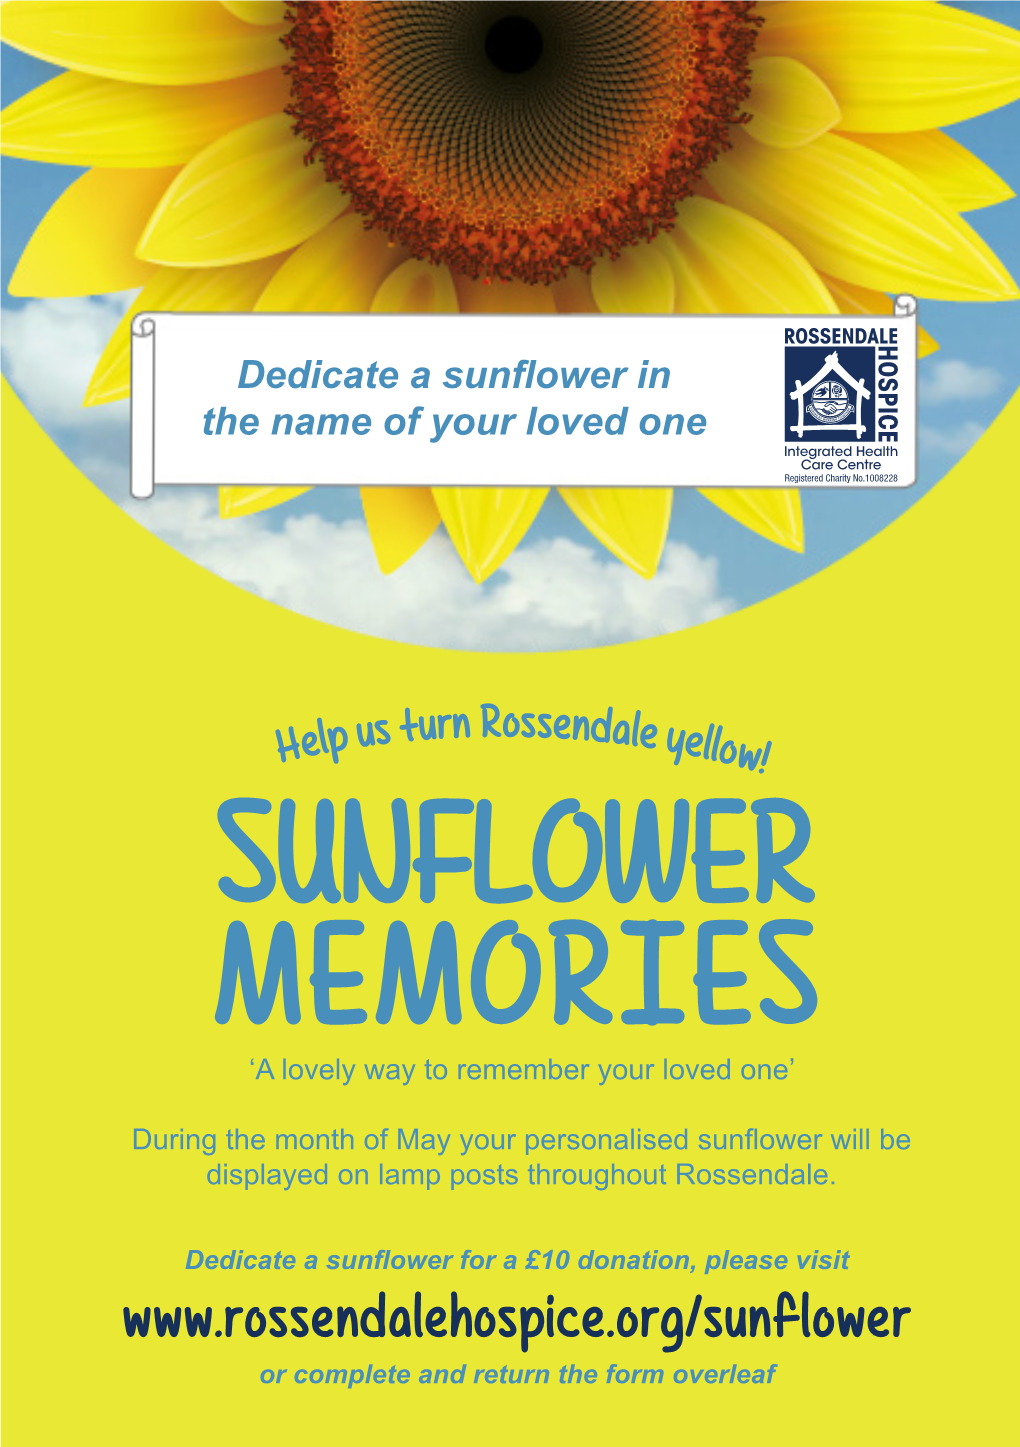 SUNFLOWER MEMORIES ‘A Lovely Way to Remember Your Loved One’